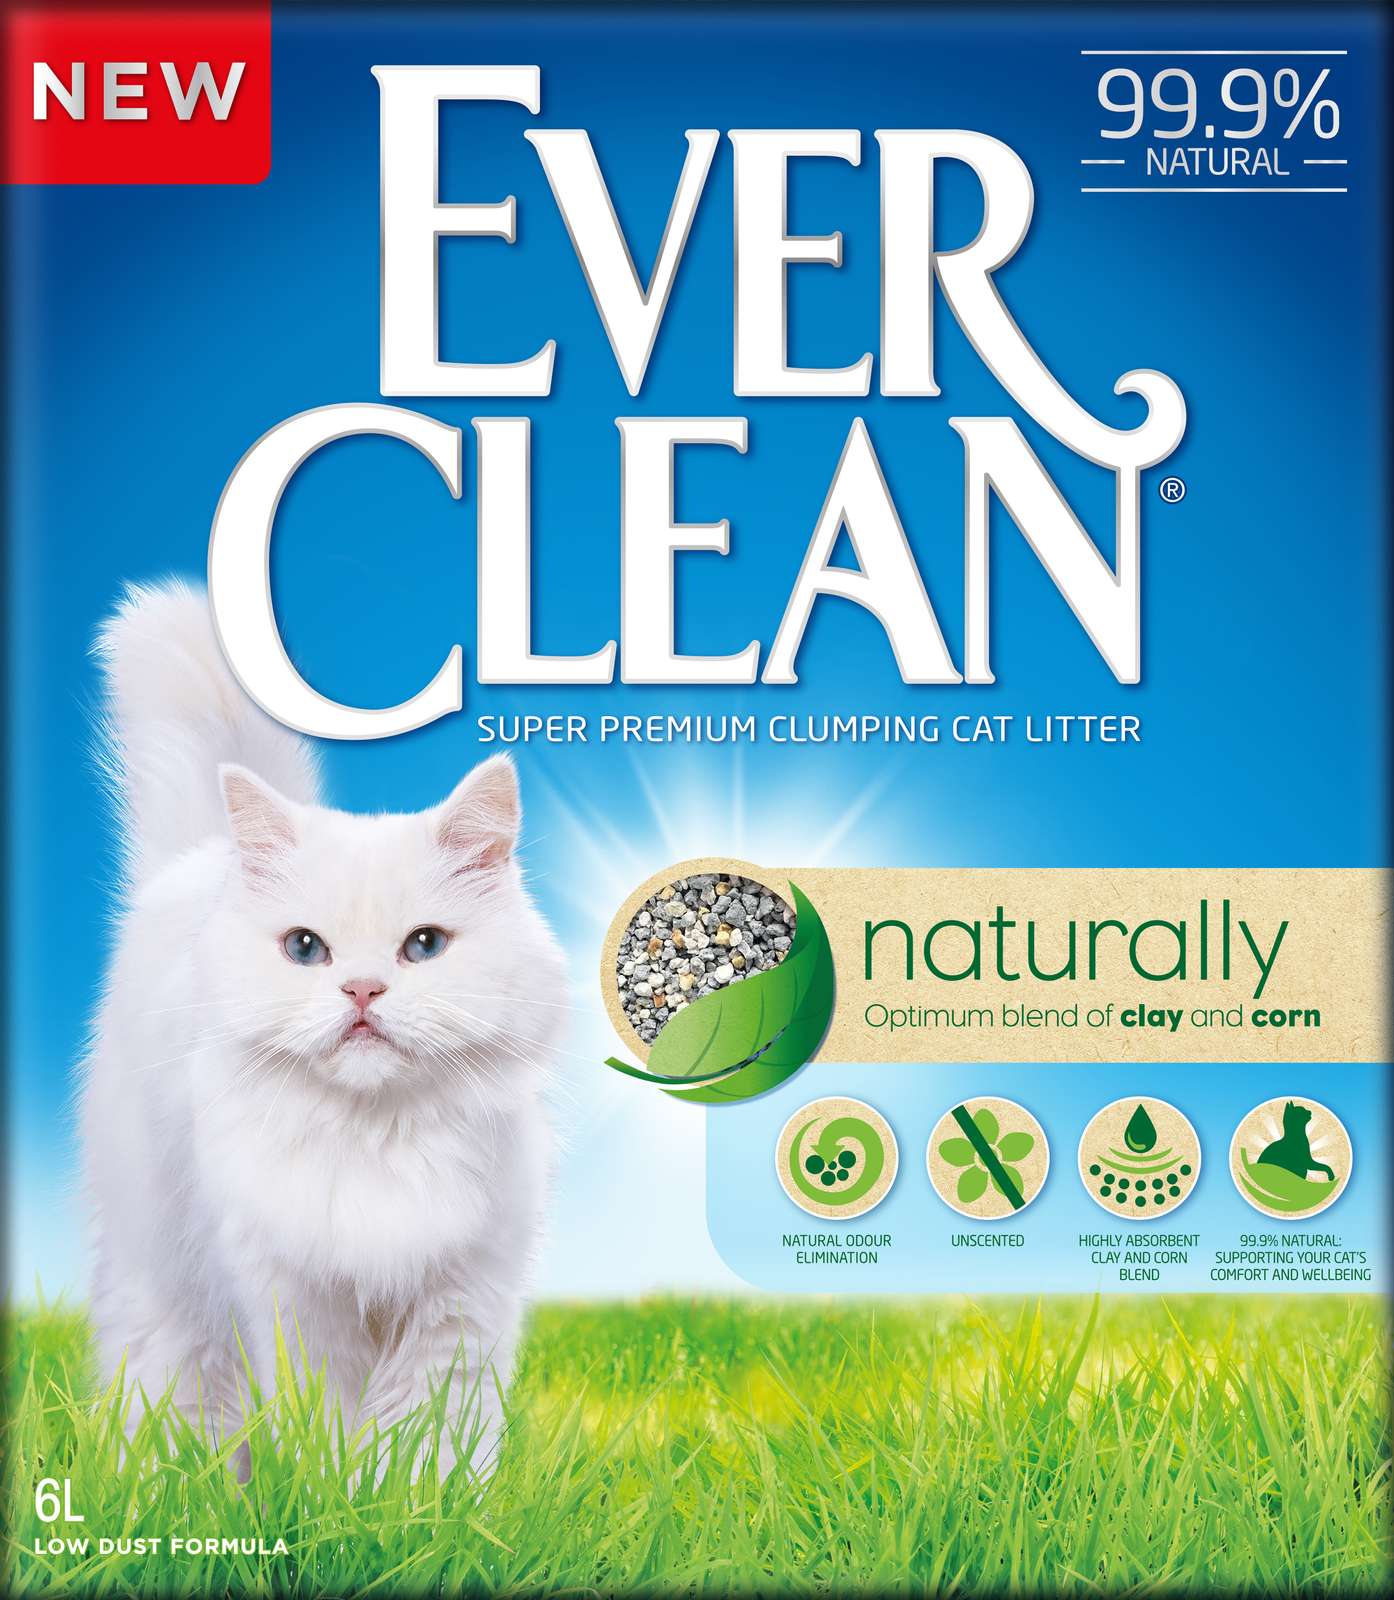 Ever Clean Naturally